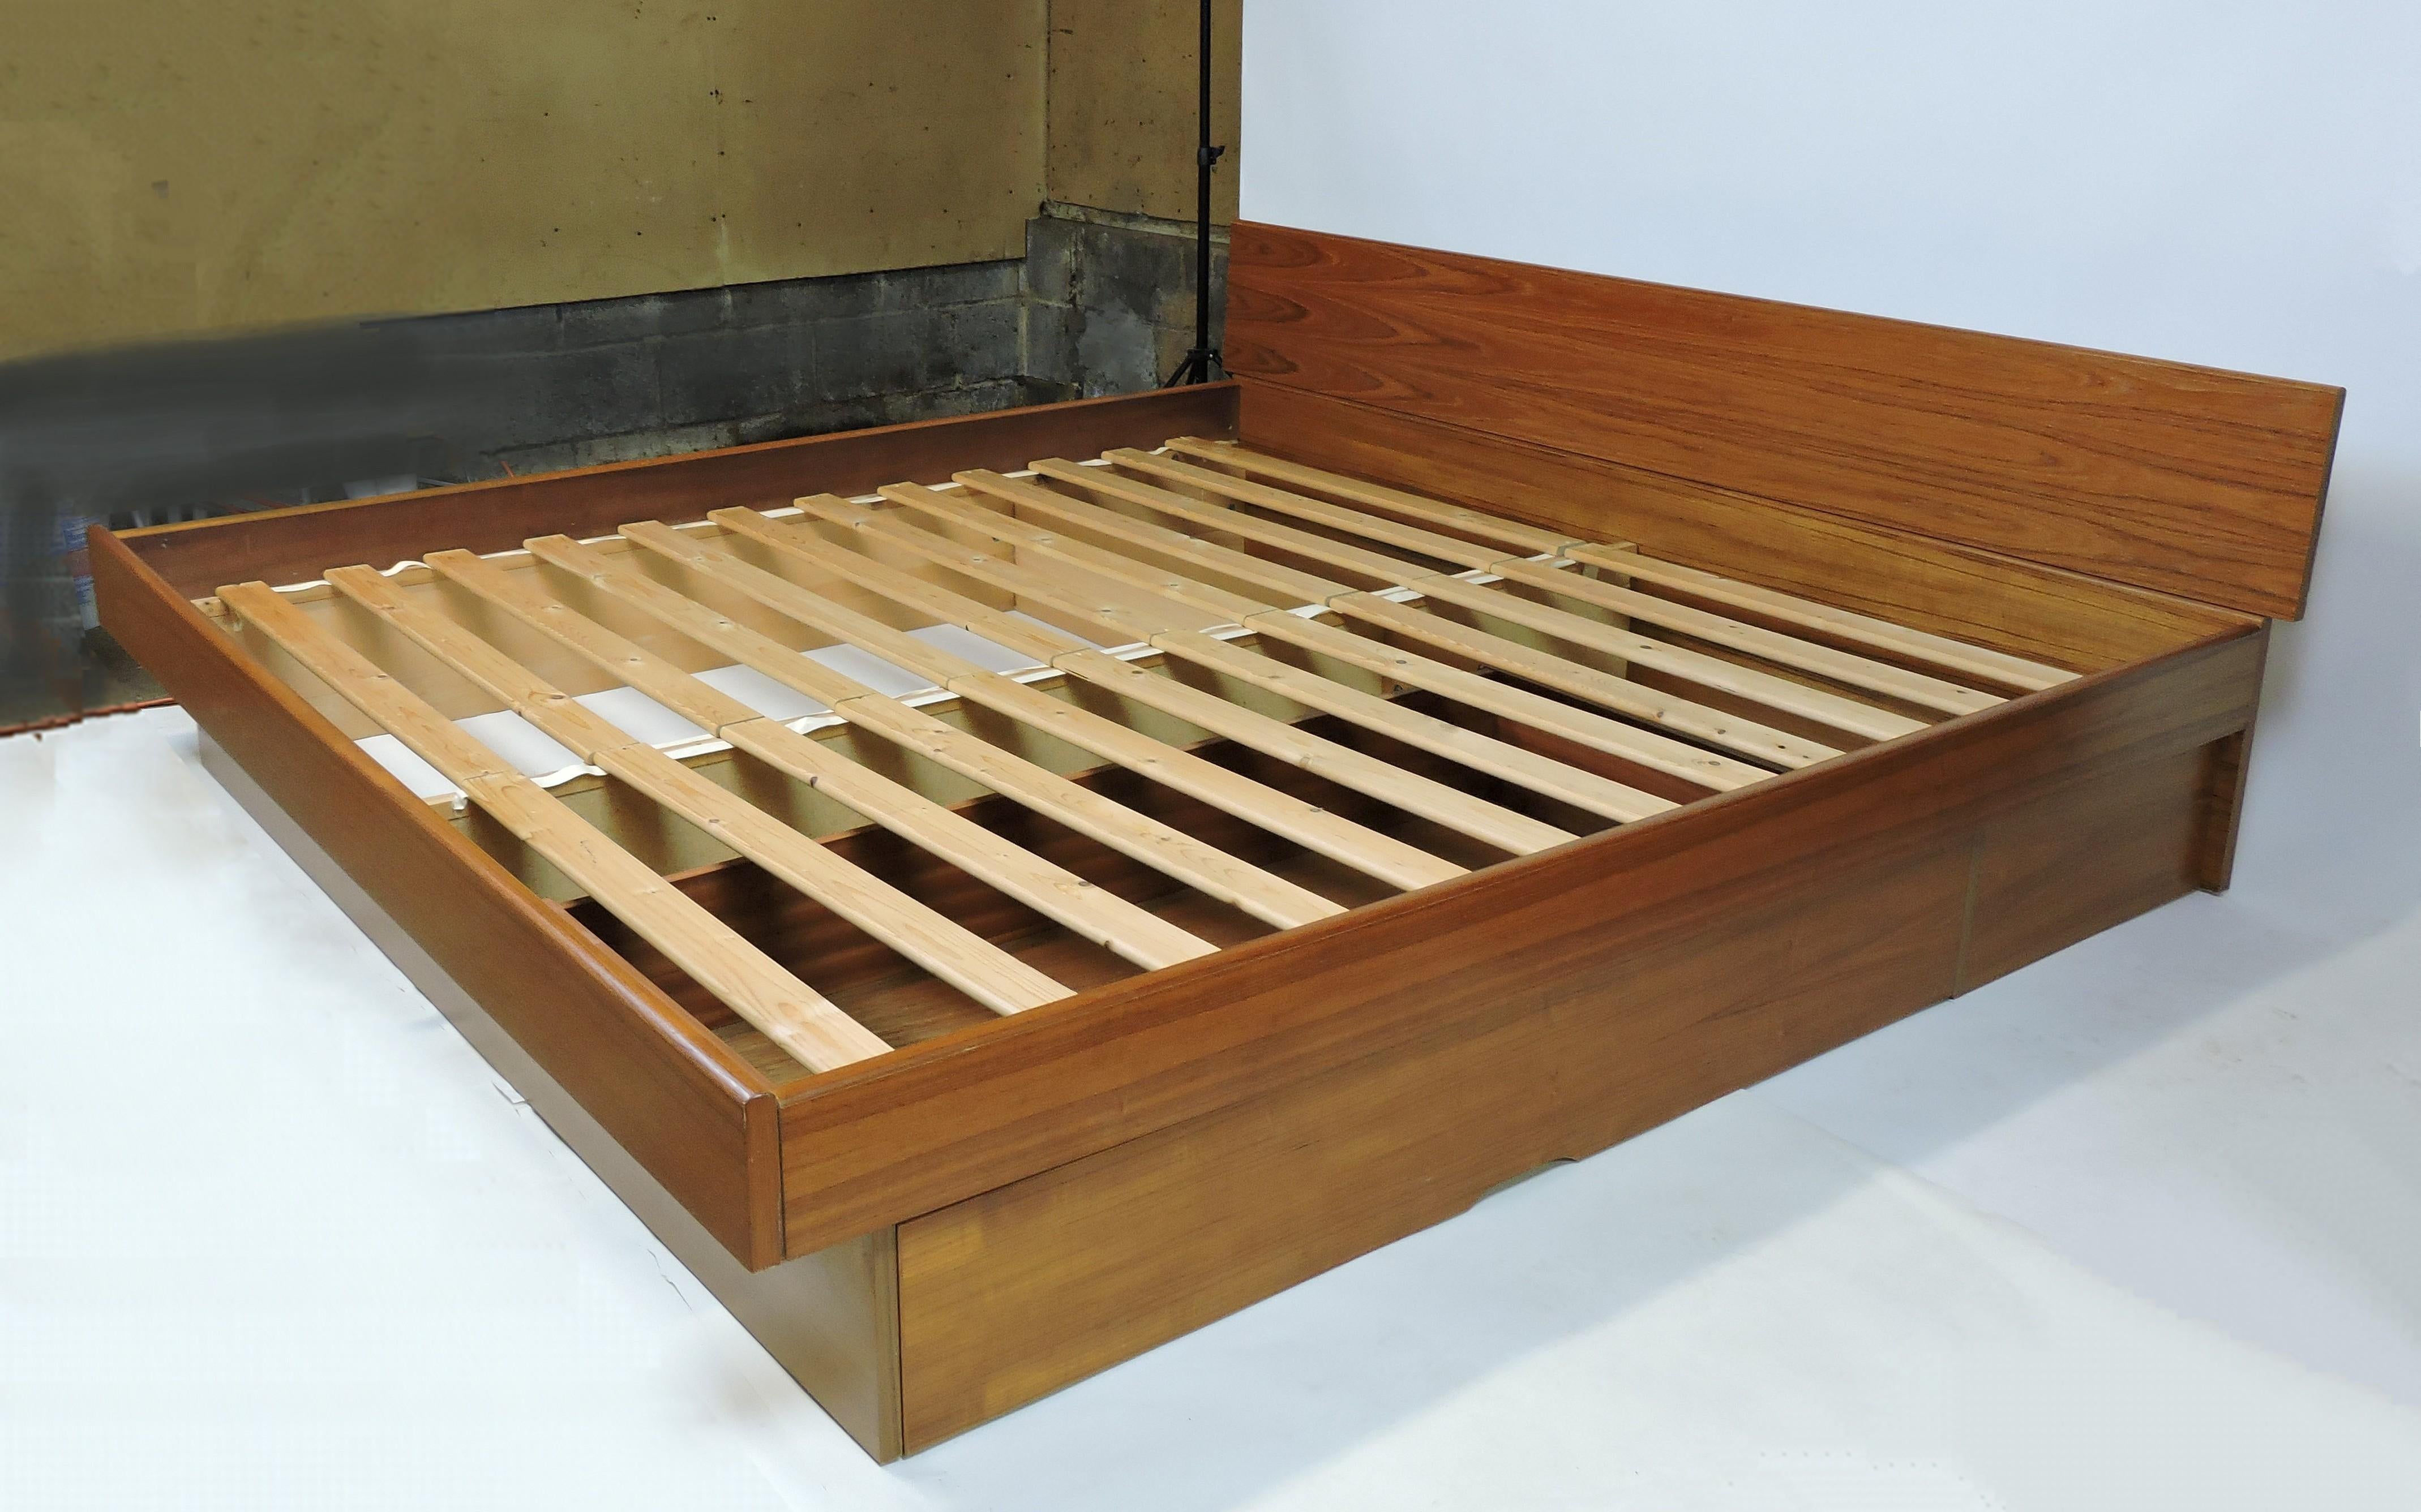 Danish Modern teak king size platform bed frame which also has a large pull out drawer underneath for storage. The inside dimensions for the mattress are 78 inches wide by 80.5 inches long. This can be used with or without the headboard (picture #